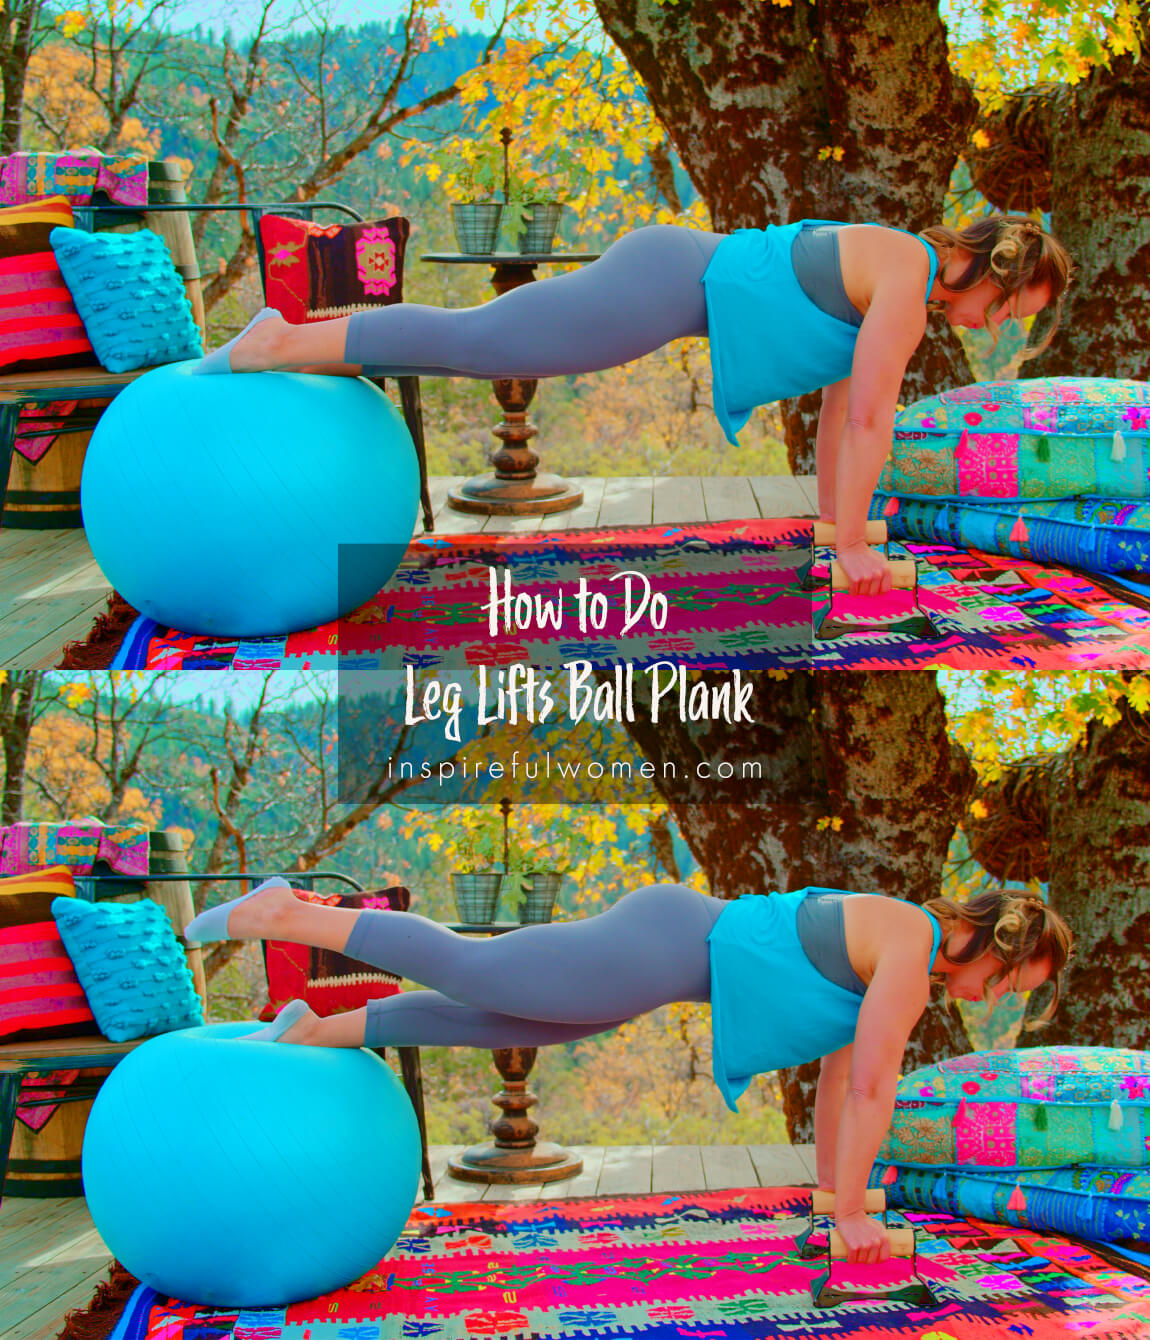 how-to-leg-lifts-stability-ball-plank-neutral-spine-core-exercise-proper-form